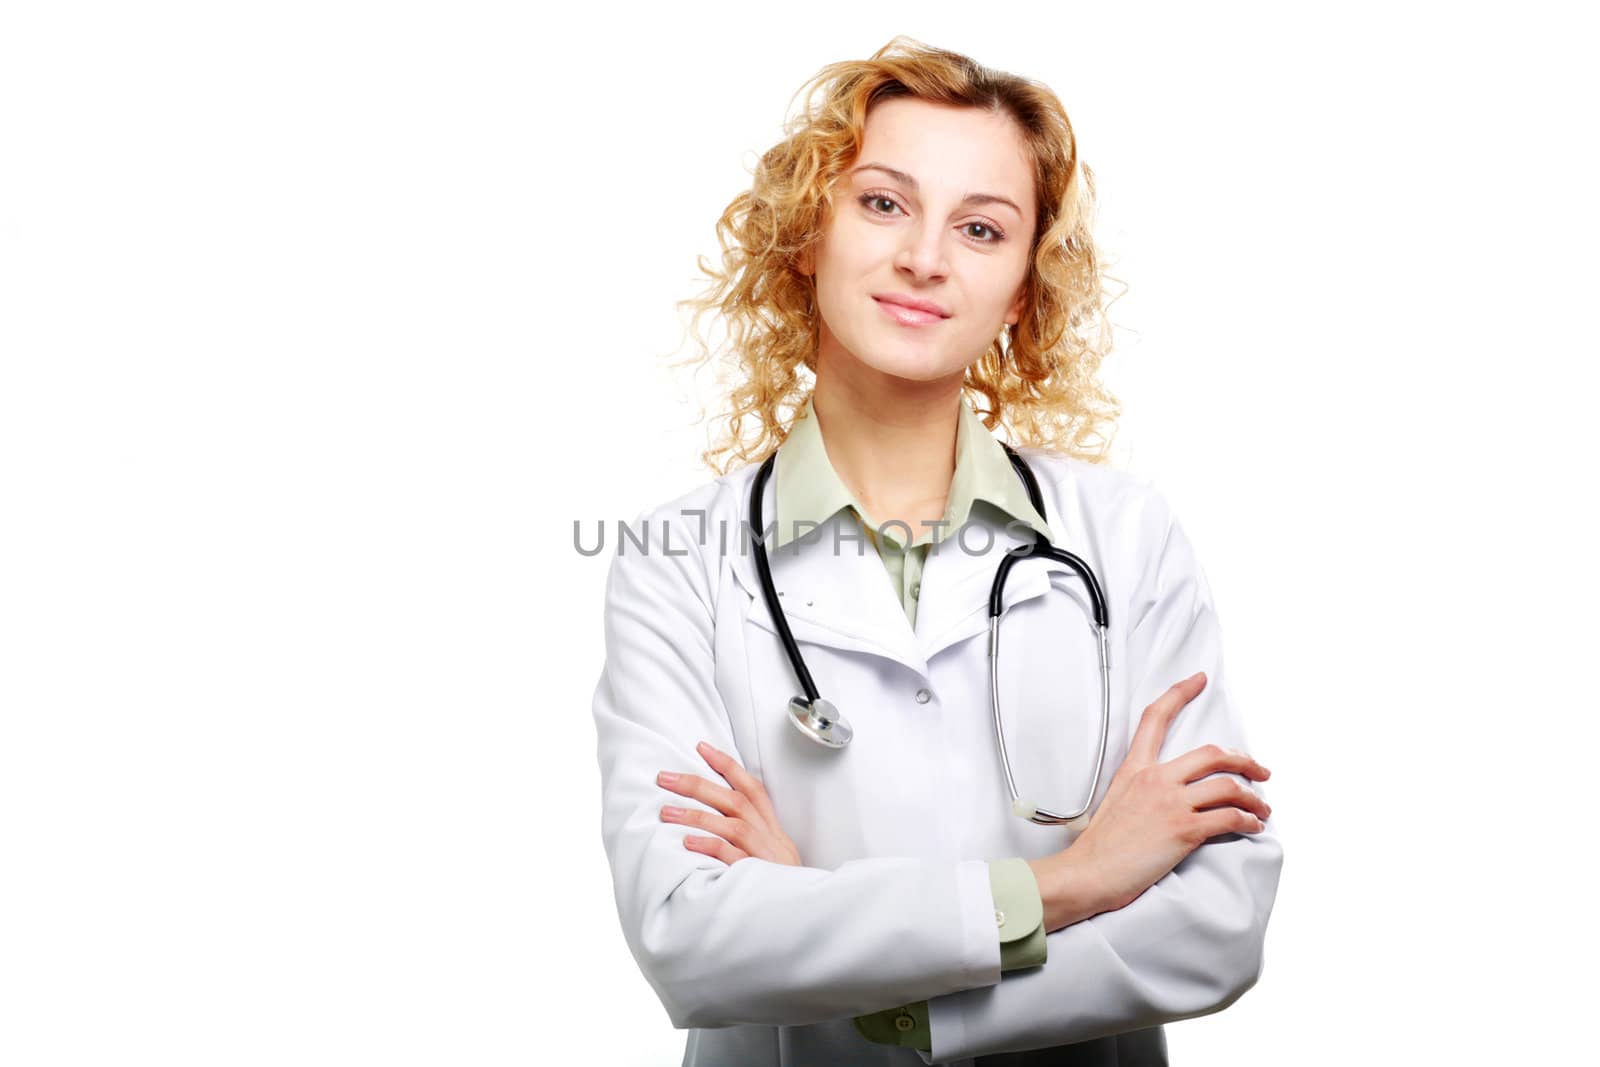 An image of a young woman with stethoscope